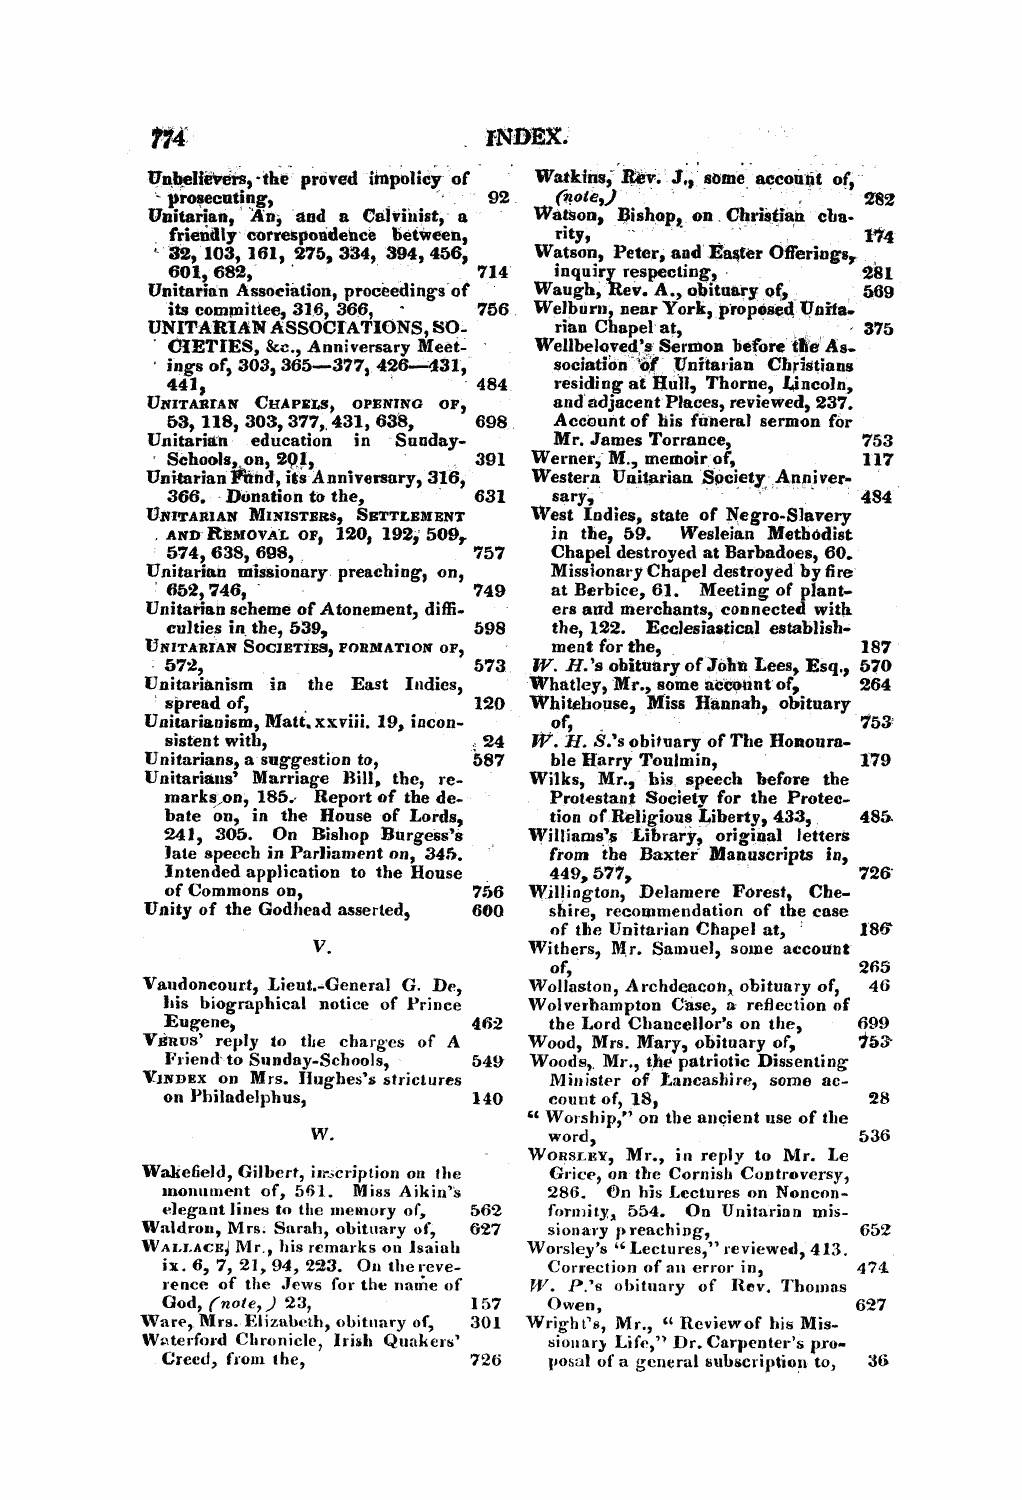 Monthly Repository (1806-1838) and Unitarian Chronicle (1832-1833): F Y, 1st edition, End matter: 14